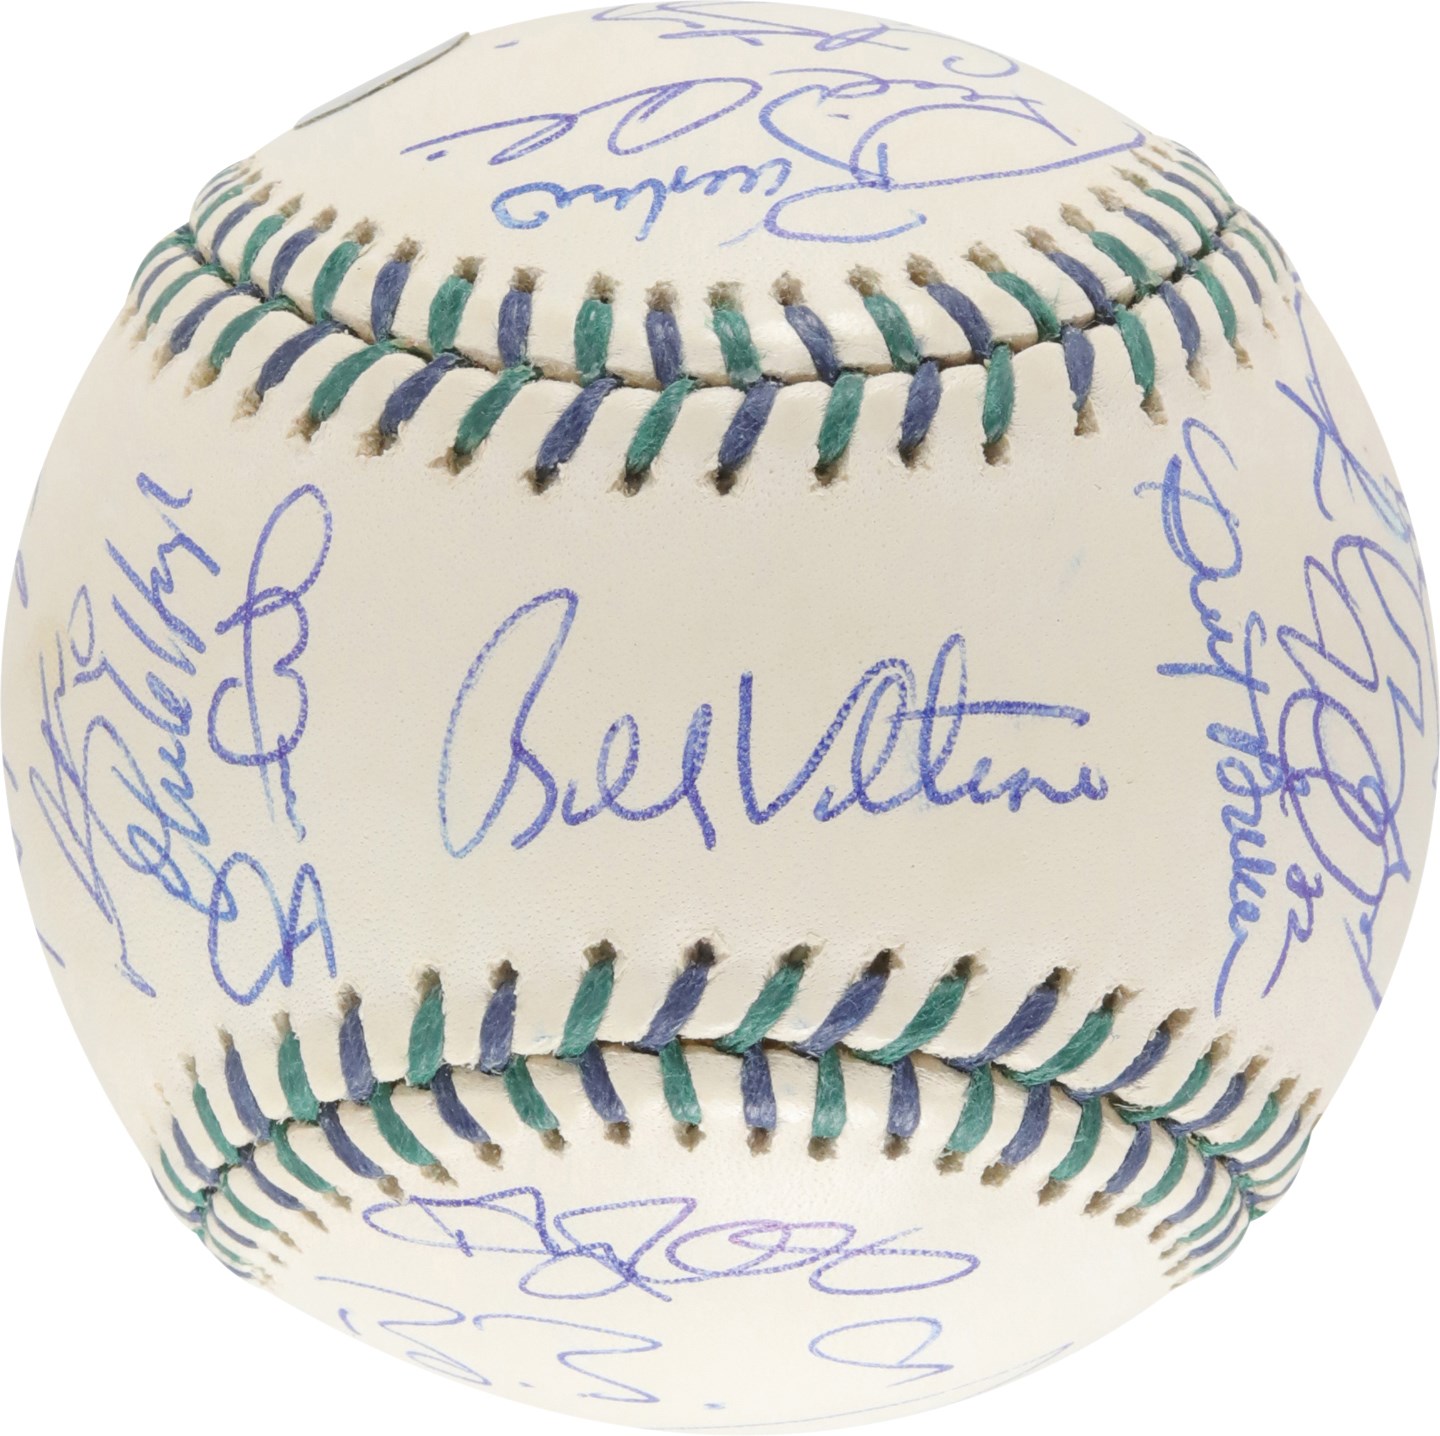 Baseball Autographs - 2001 American & National League All Star Teams Signed Baseball from Home Run Derby (MLB)